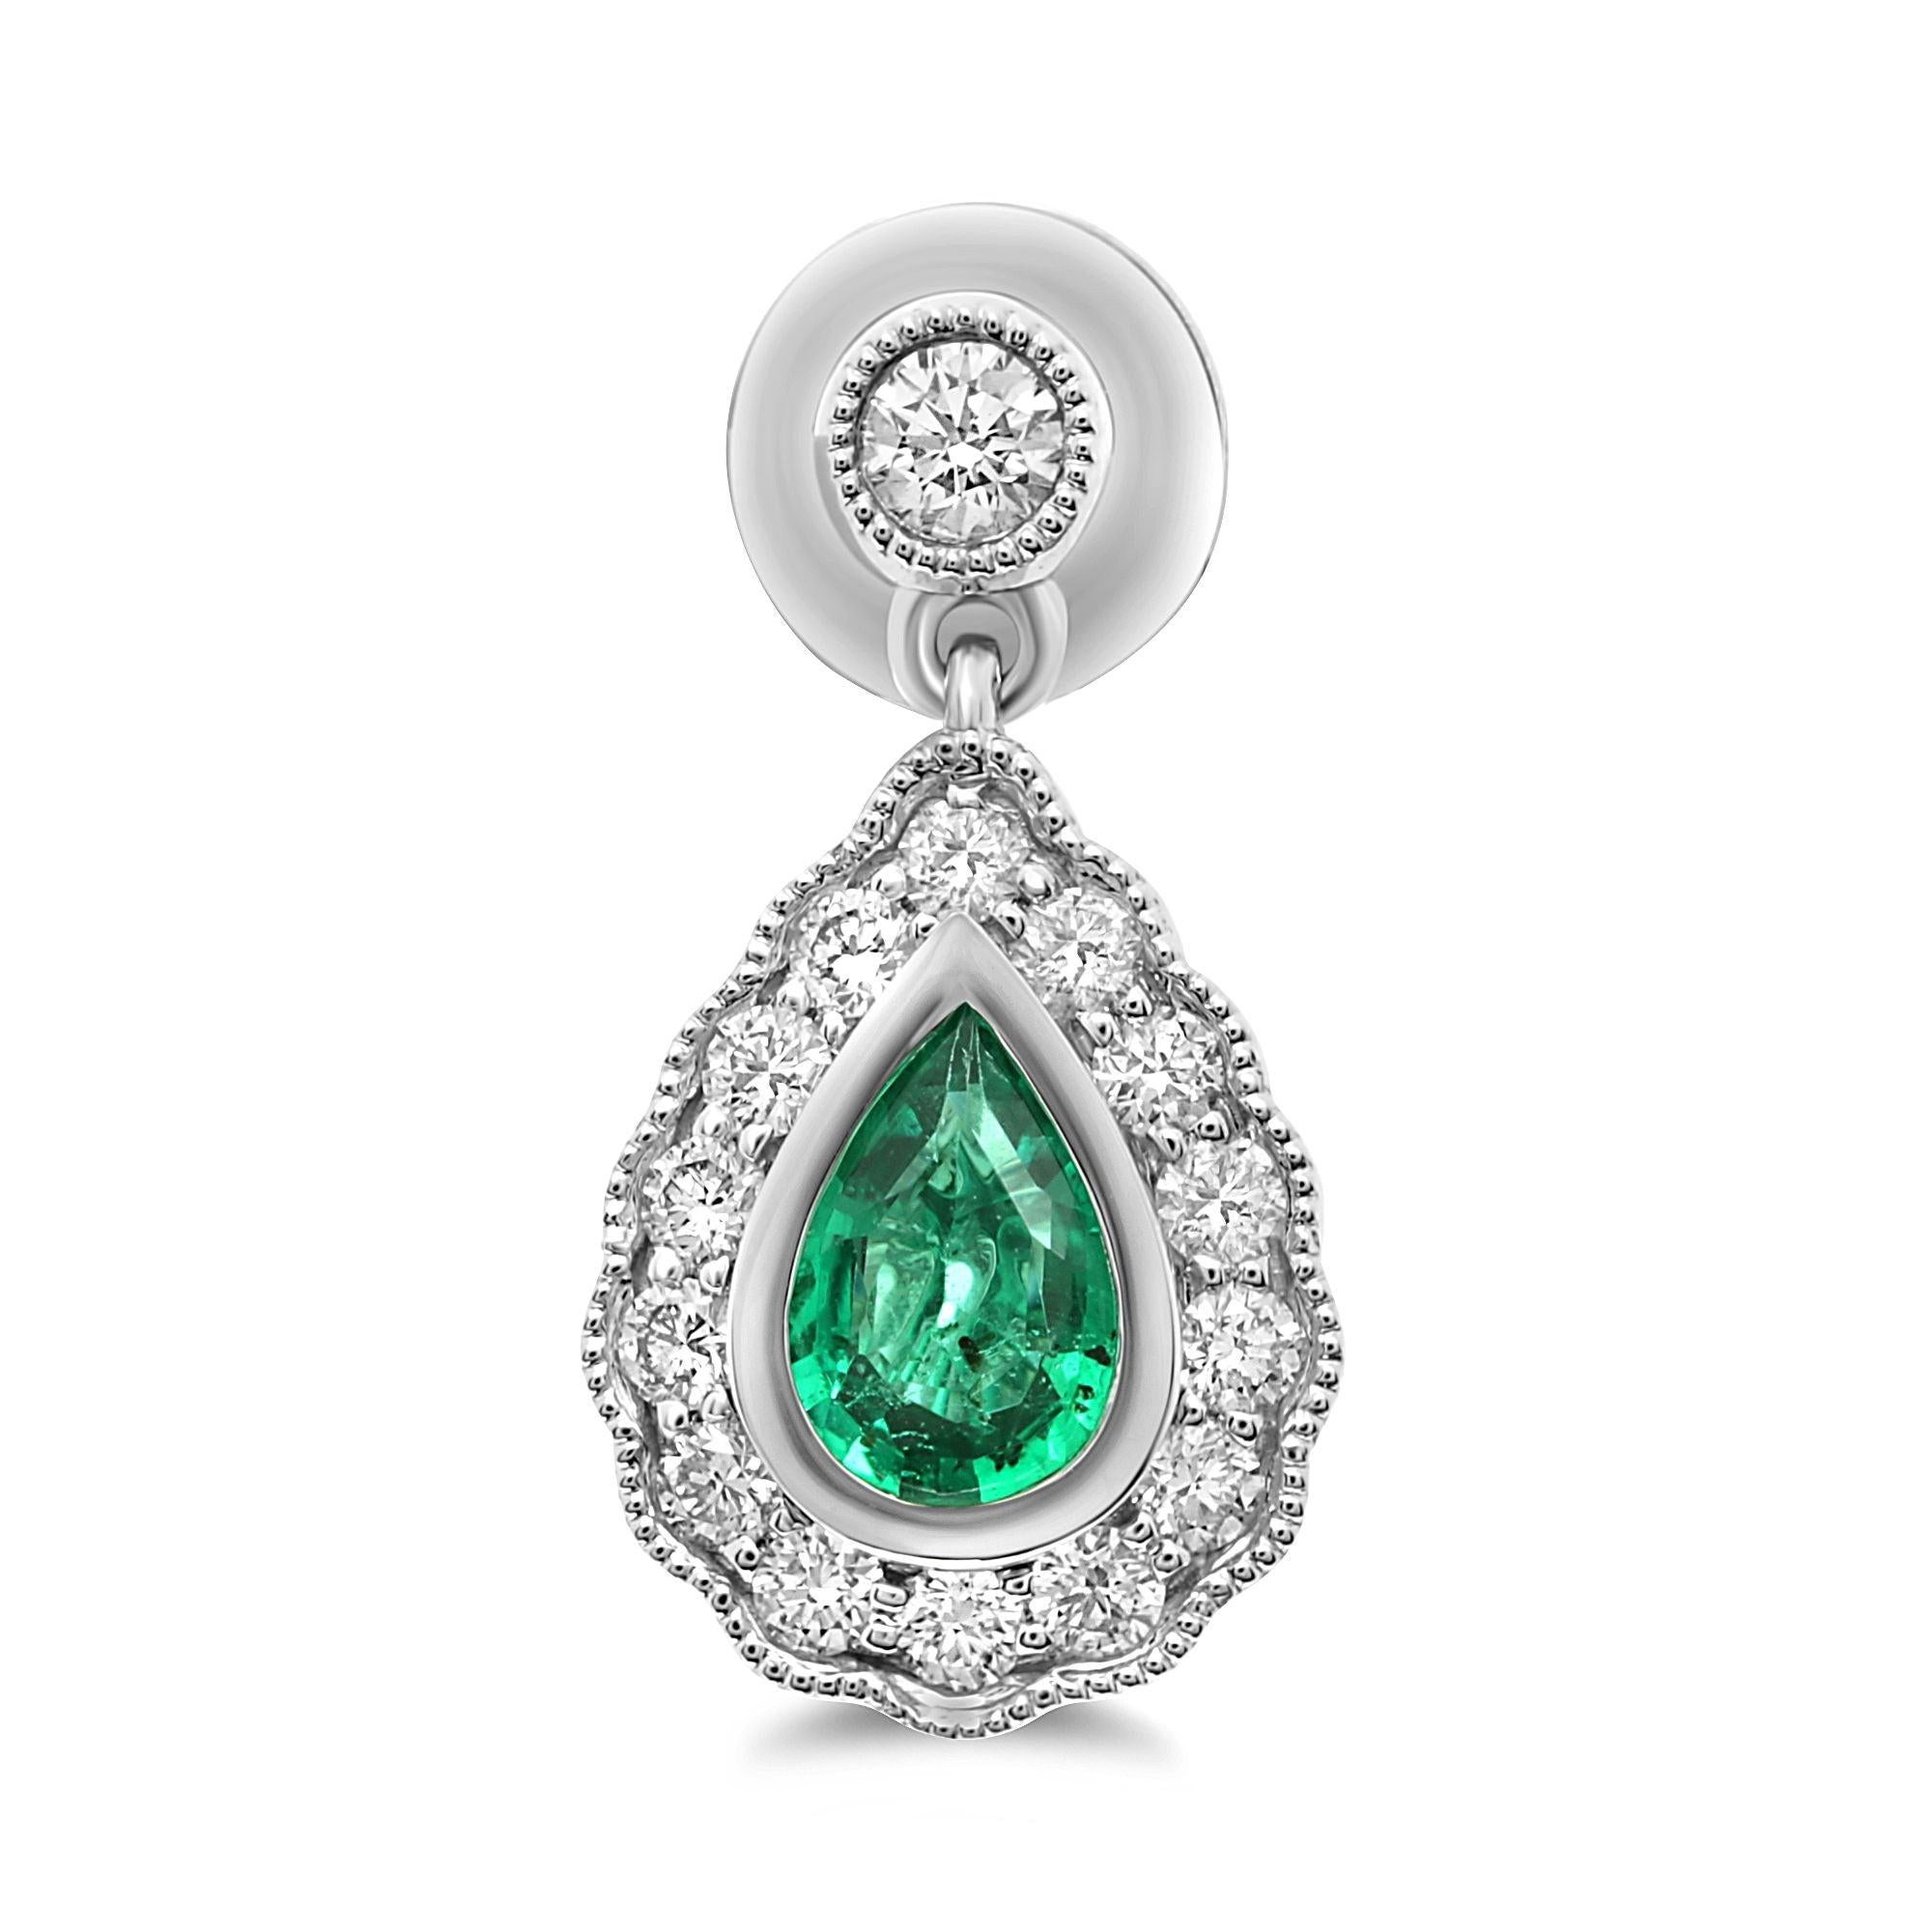 At the center of these stunning 18 karat white gold earrings rest 0.70 carats of pear-shaped emeralds. The colorful center stones are brought to life by 0.50 carats of white diamonds, set in single halos around the emeralds and enhanced by milgrain